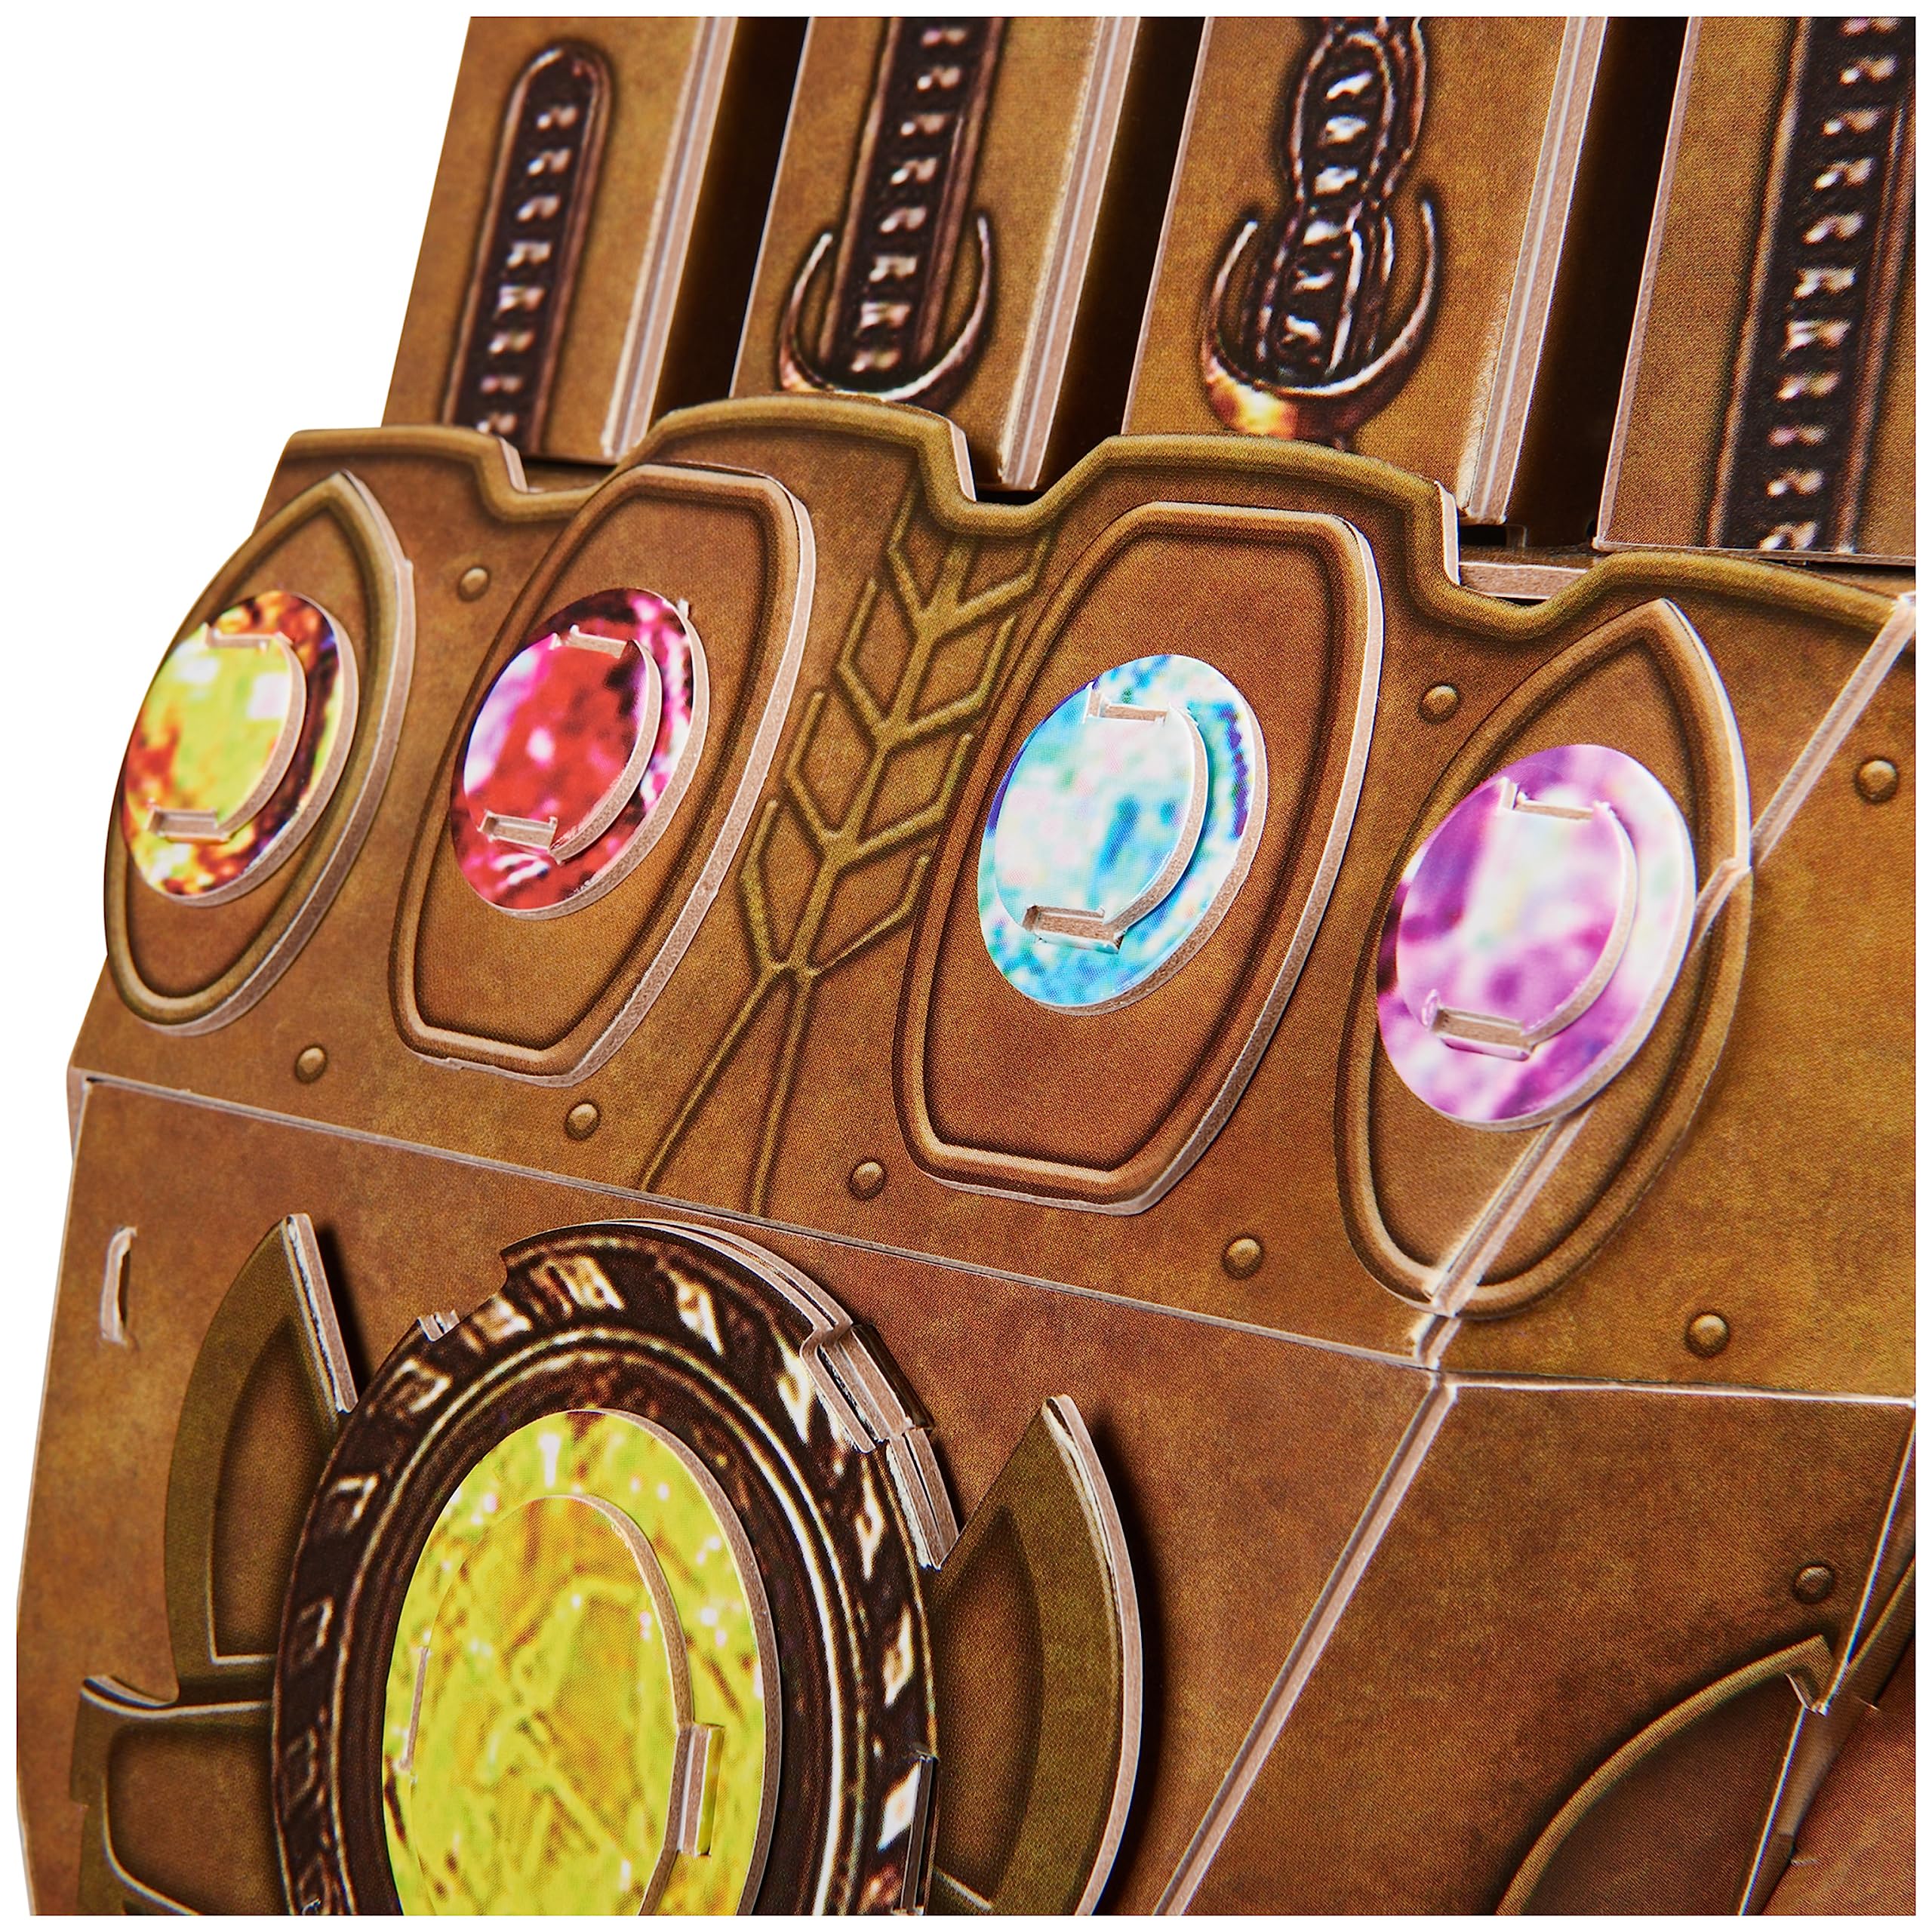 4D Puzzles, Marvel Infinity Gauntlet 3D Puzzle Model Kit with Stand 142 Pcs | Thanos Desk Decor | Building Toys | 3D Puzzles for Adults & Teens 12+